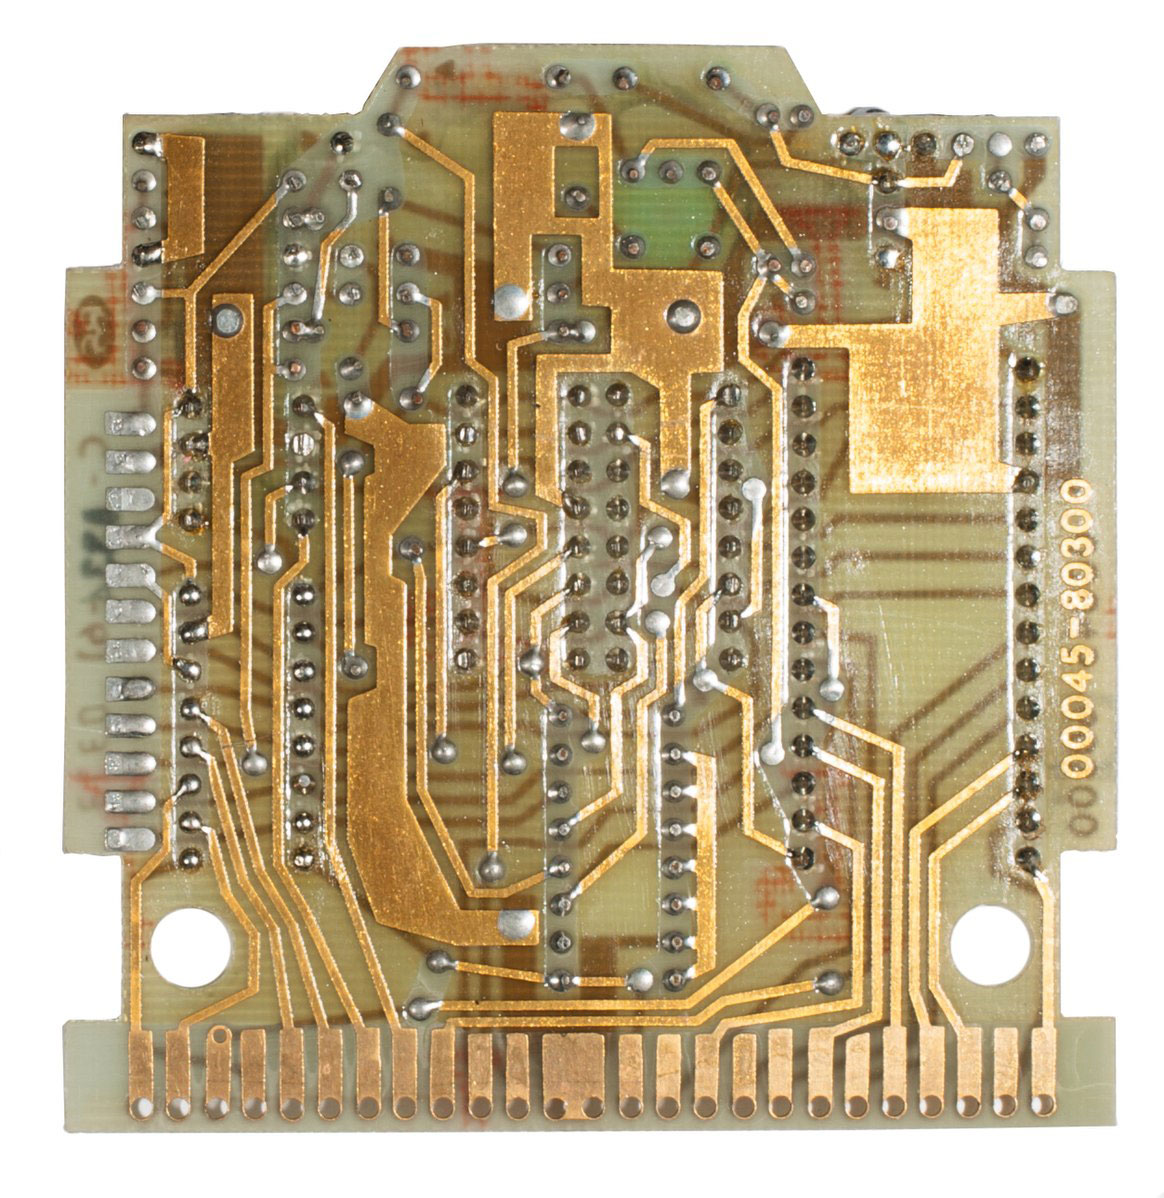 A gold-plated PCB. Note the fingers